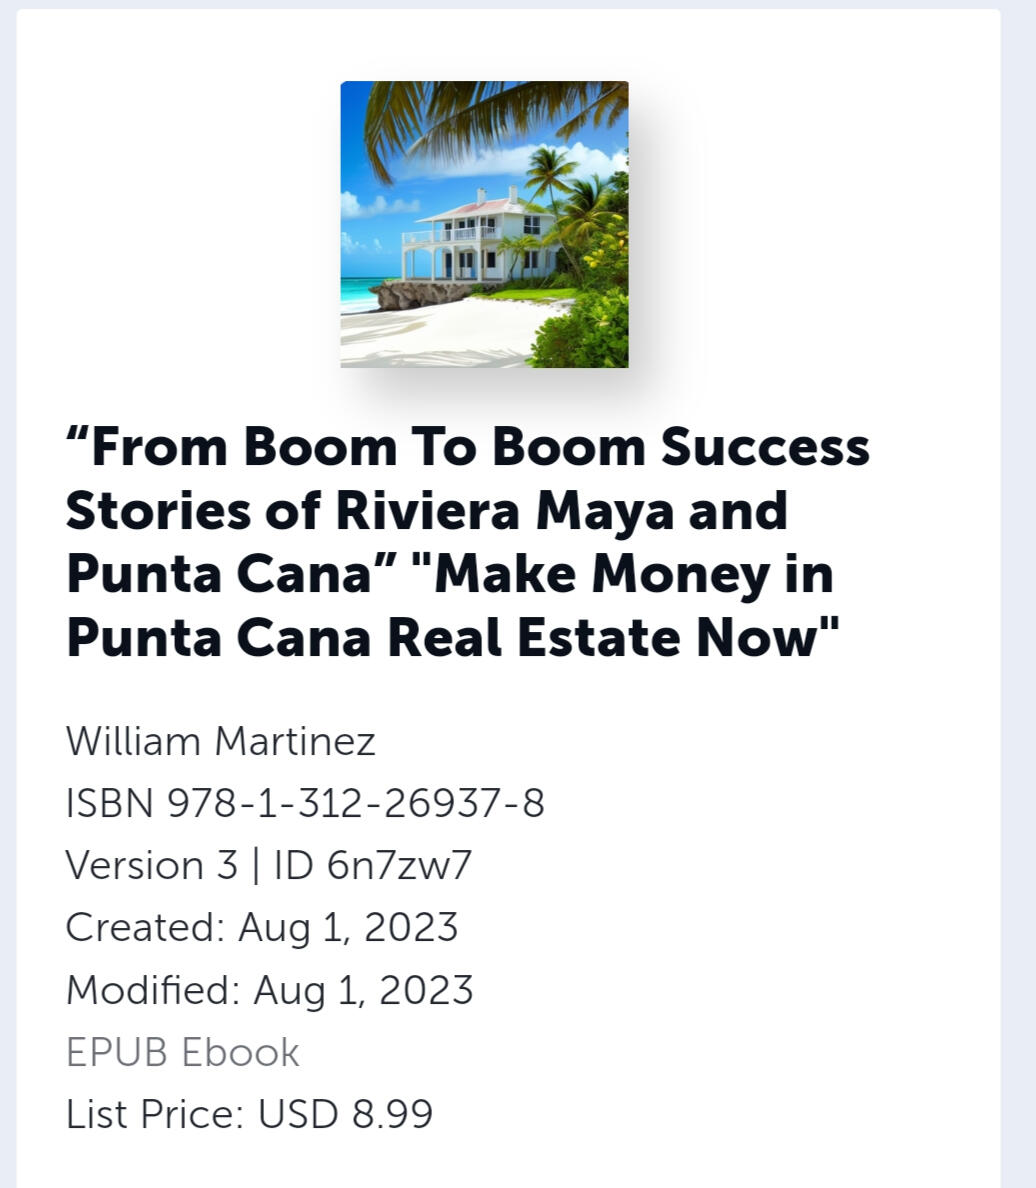 Make Money In Punta Cana Real estate Now-eBook